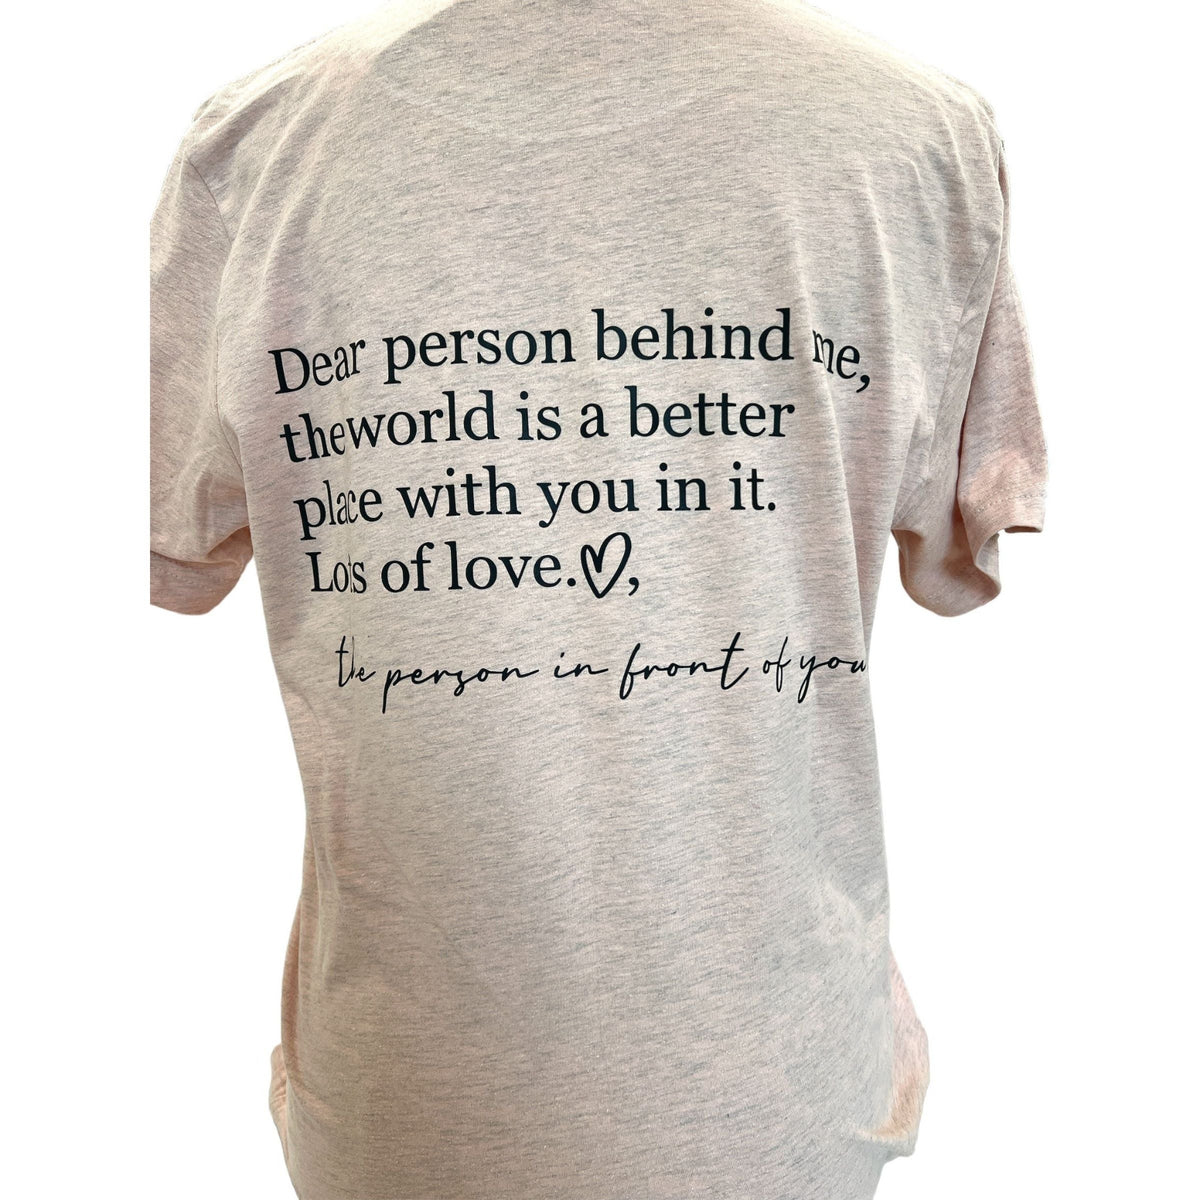 "The world is a better place with you in it" tan adult t-shirt. 